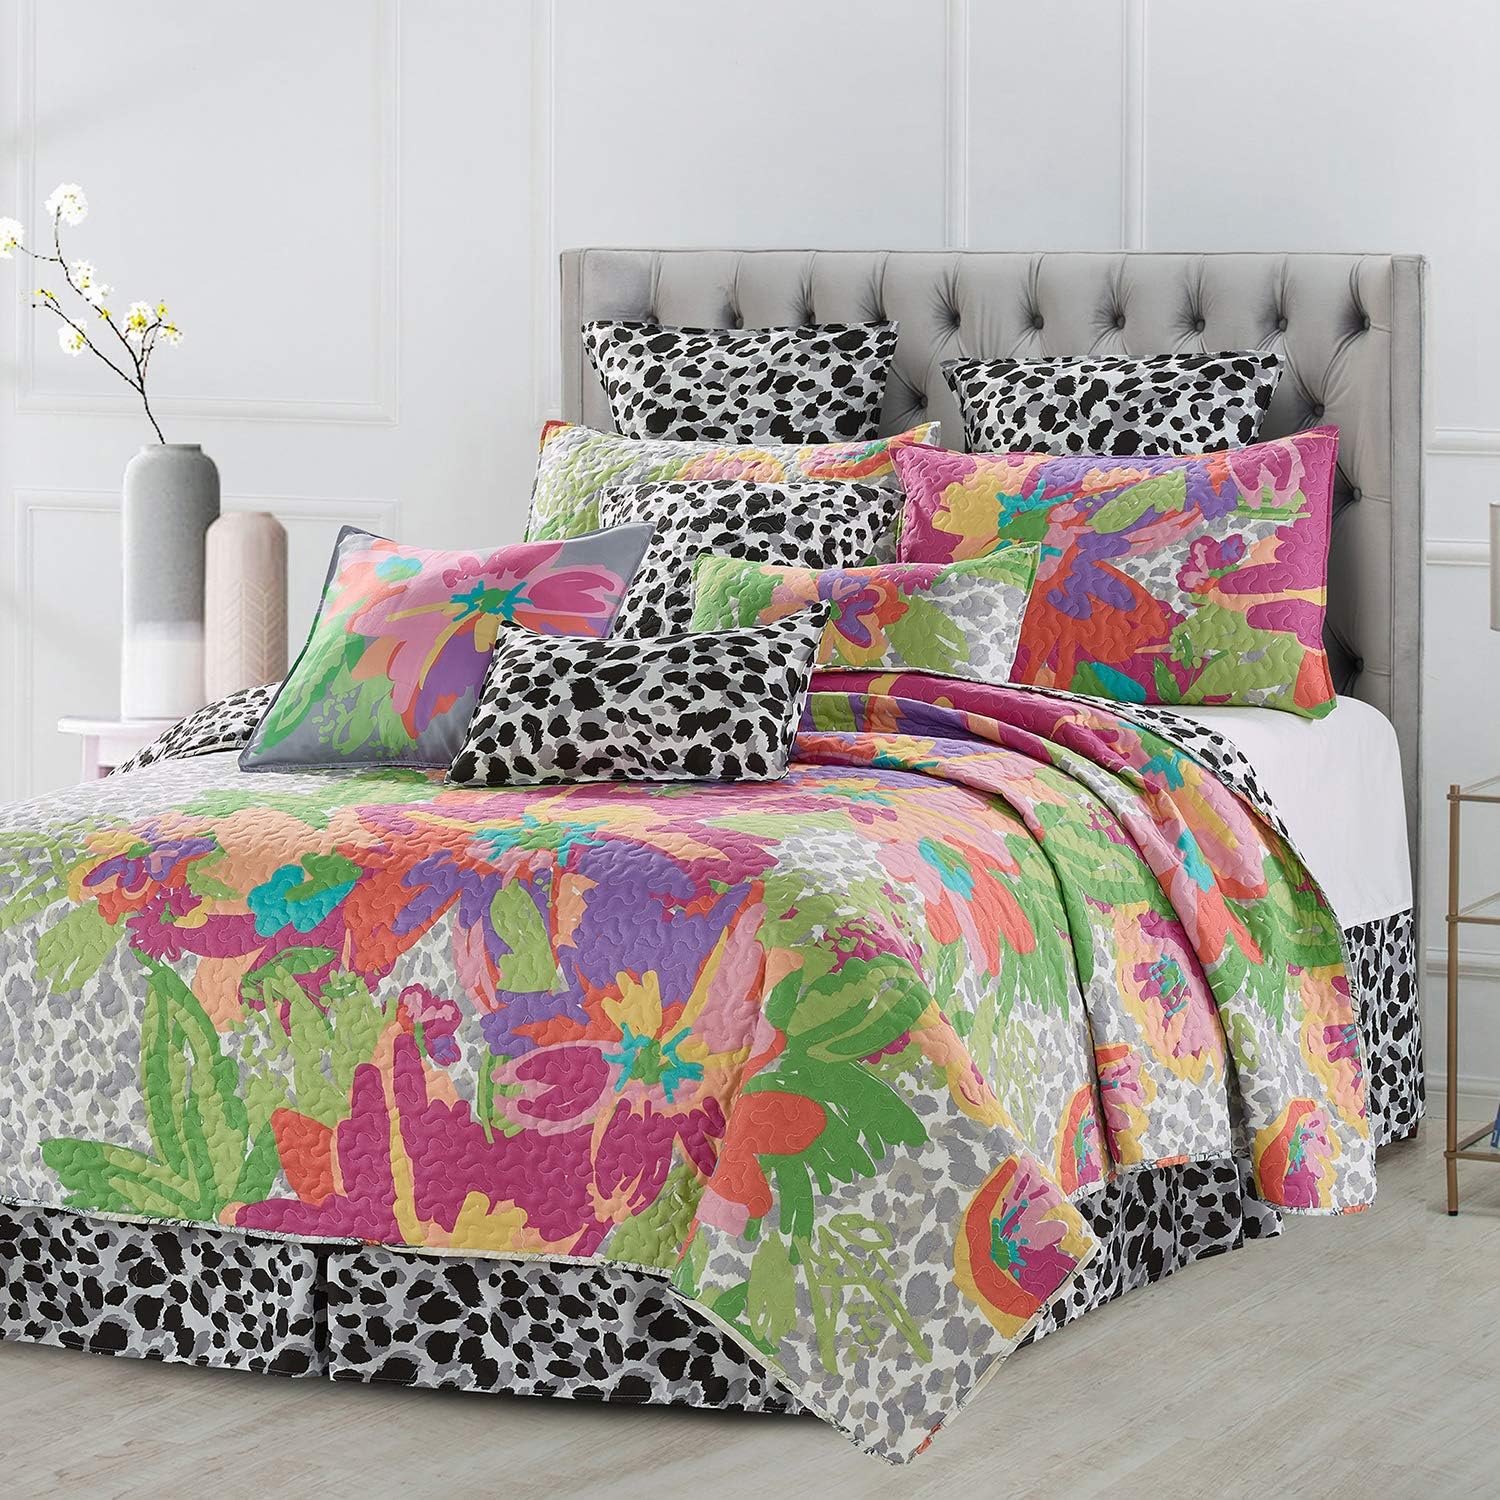 Virah Bella Quilt Bedding Set in Full/Queen Angelina Printed Lightweight Reversible Quilt with 2 Matching Pillow Shams - Cozy & Beautiful Contemporary-Themed Bedding